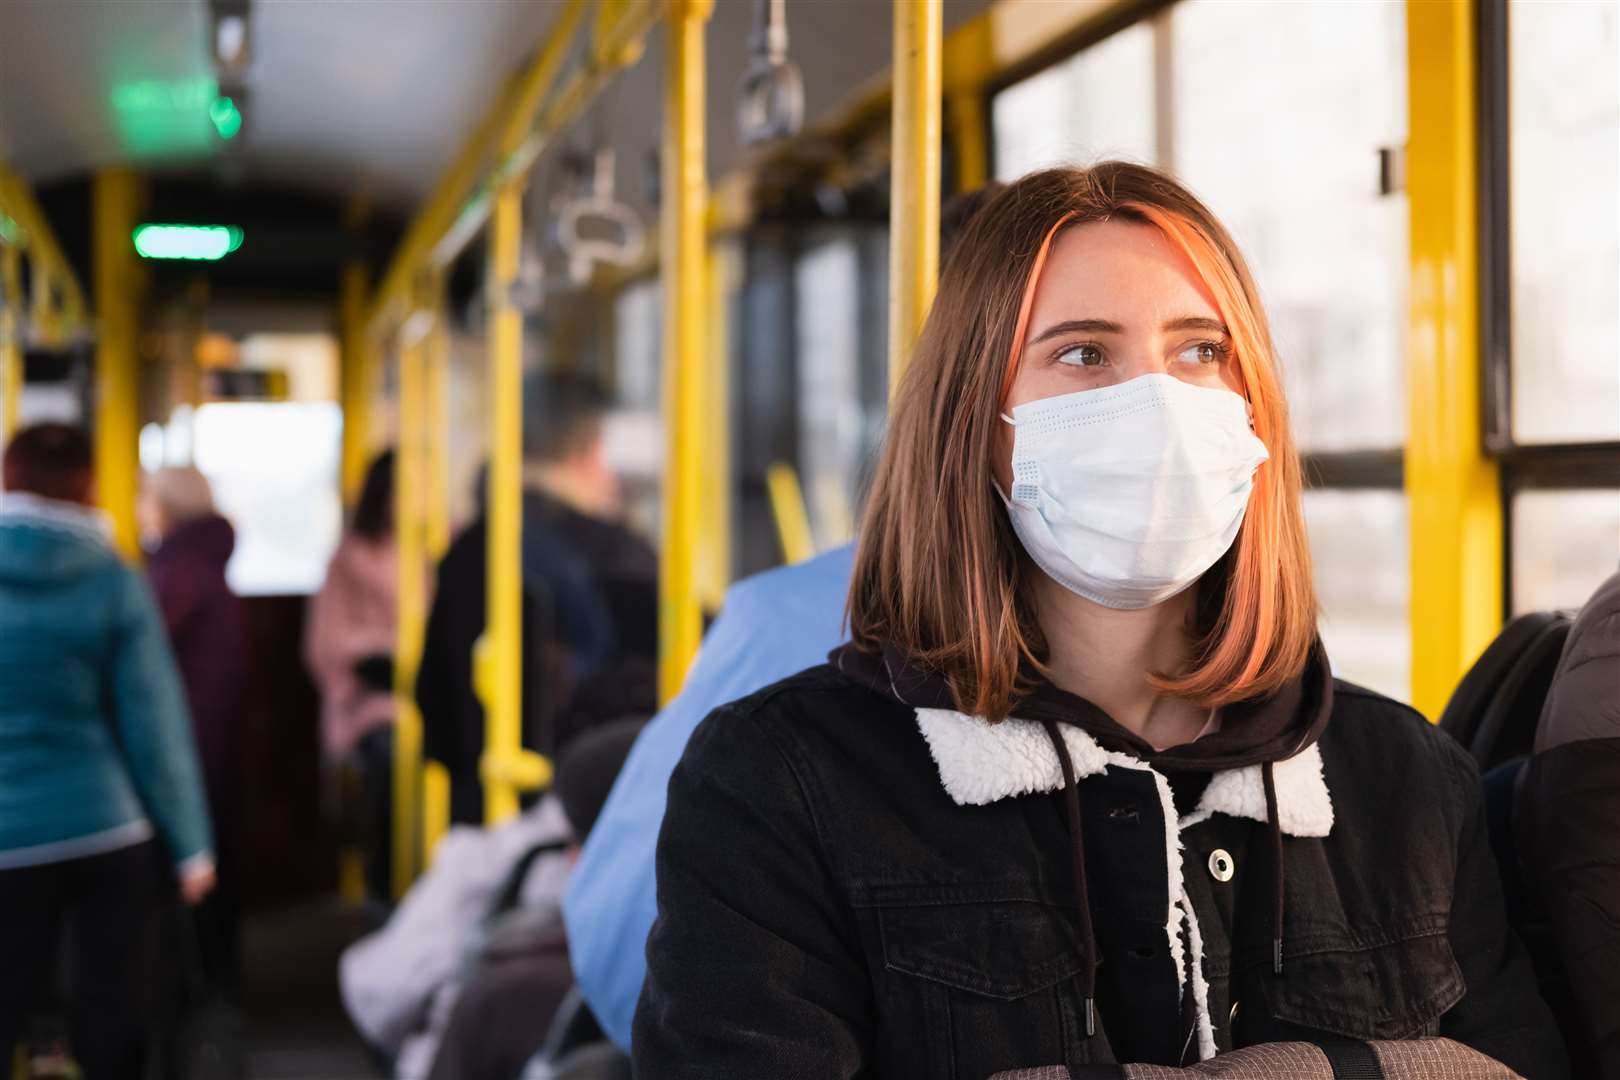 People who are unwell are being asked to wear a face mask if they need to leave the house